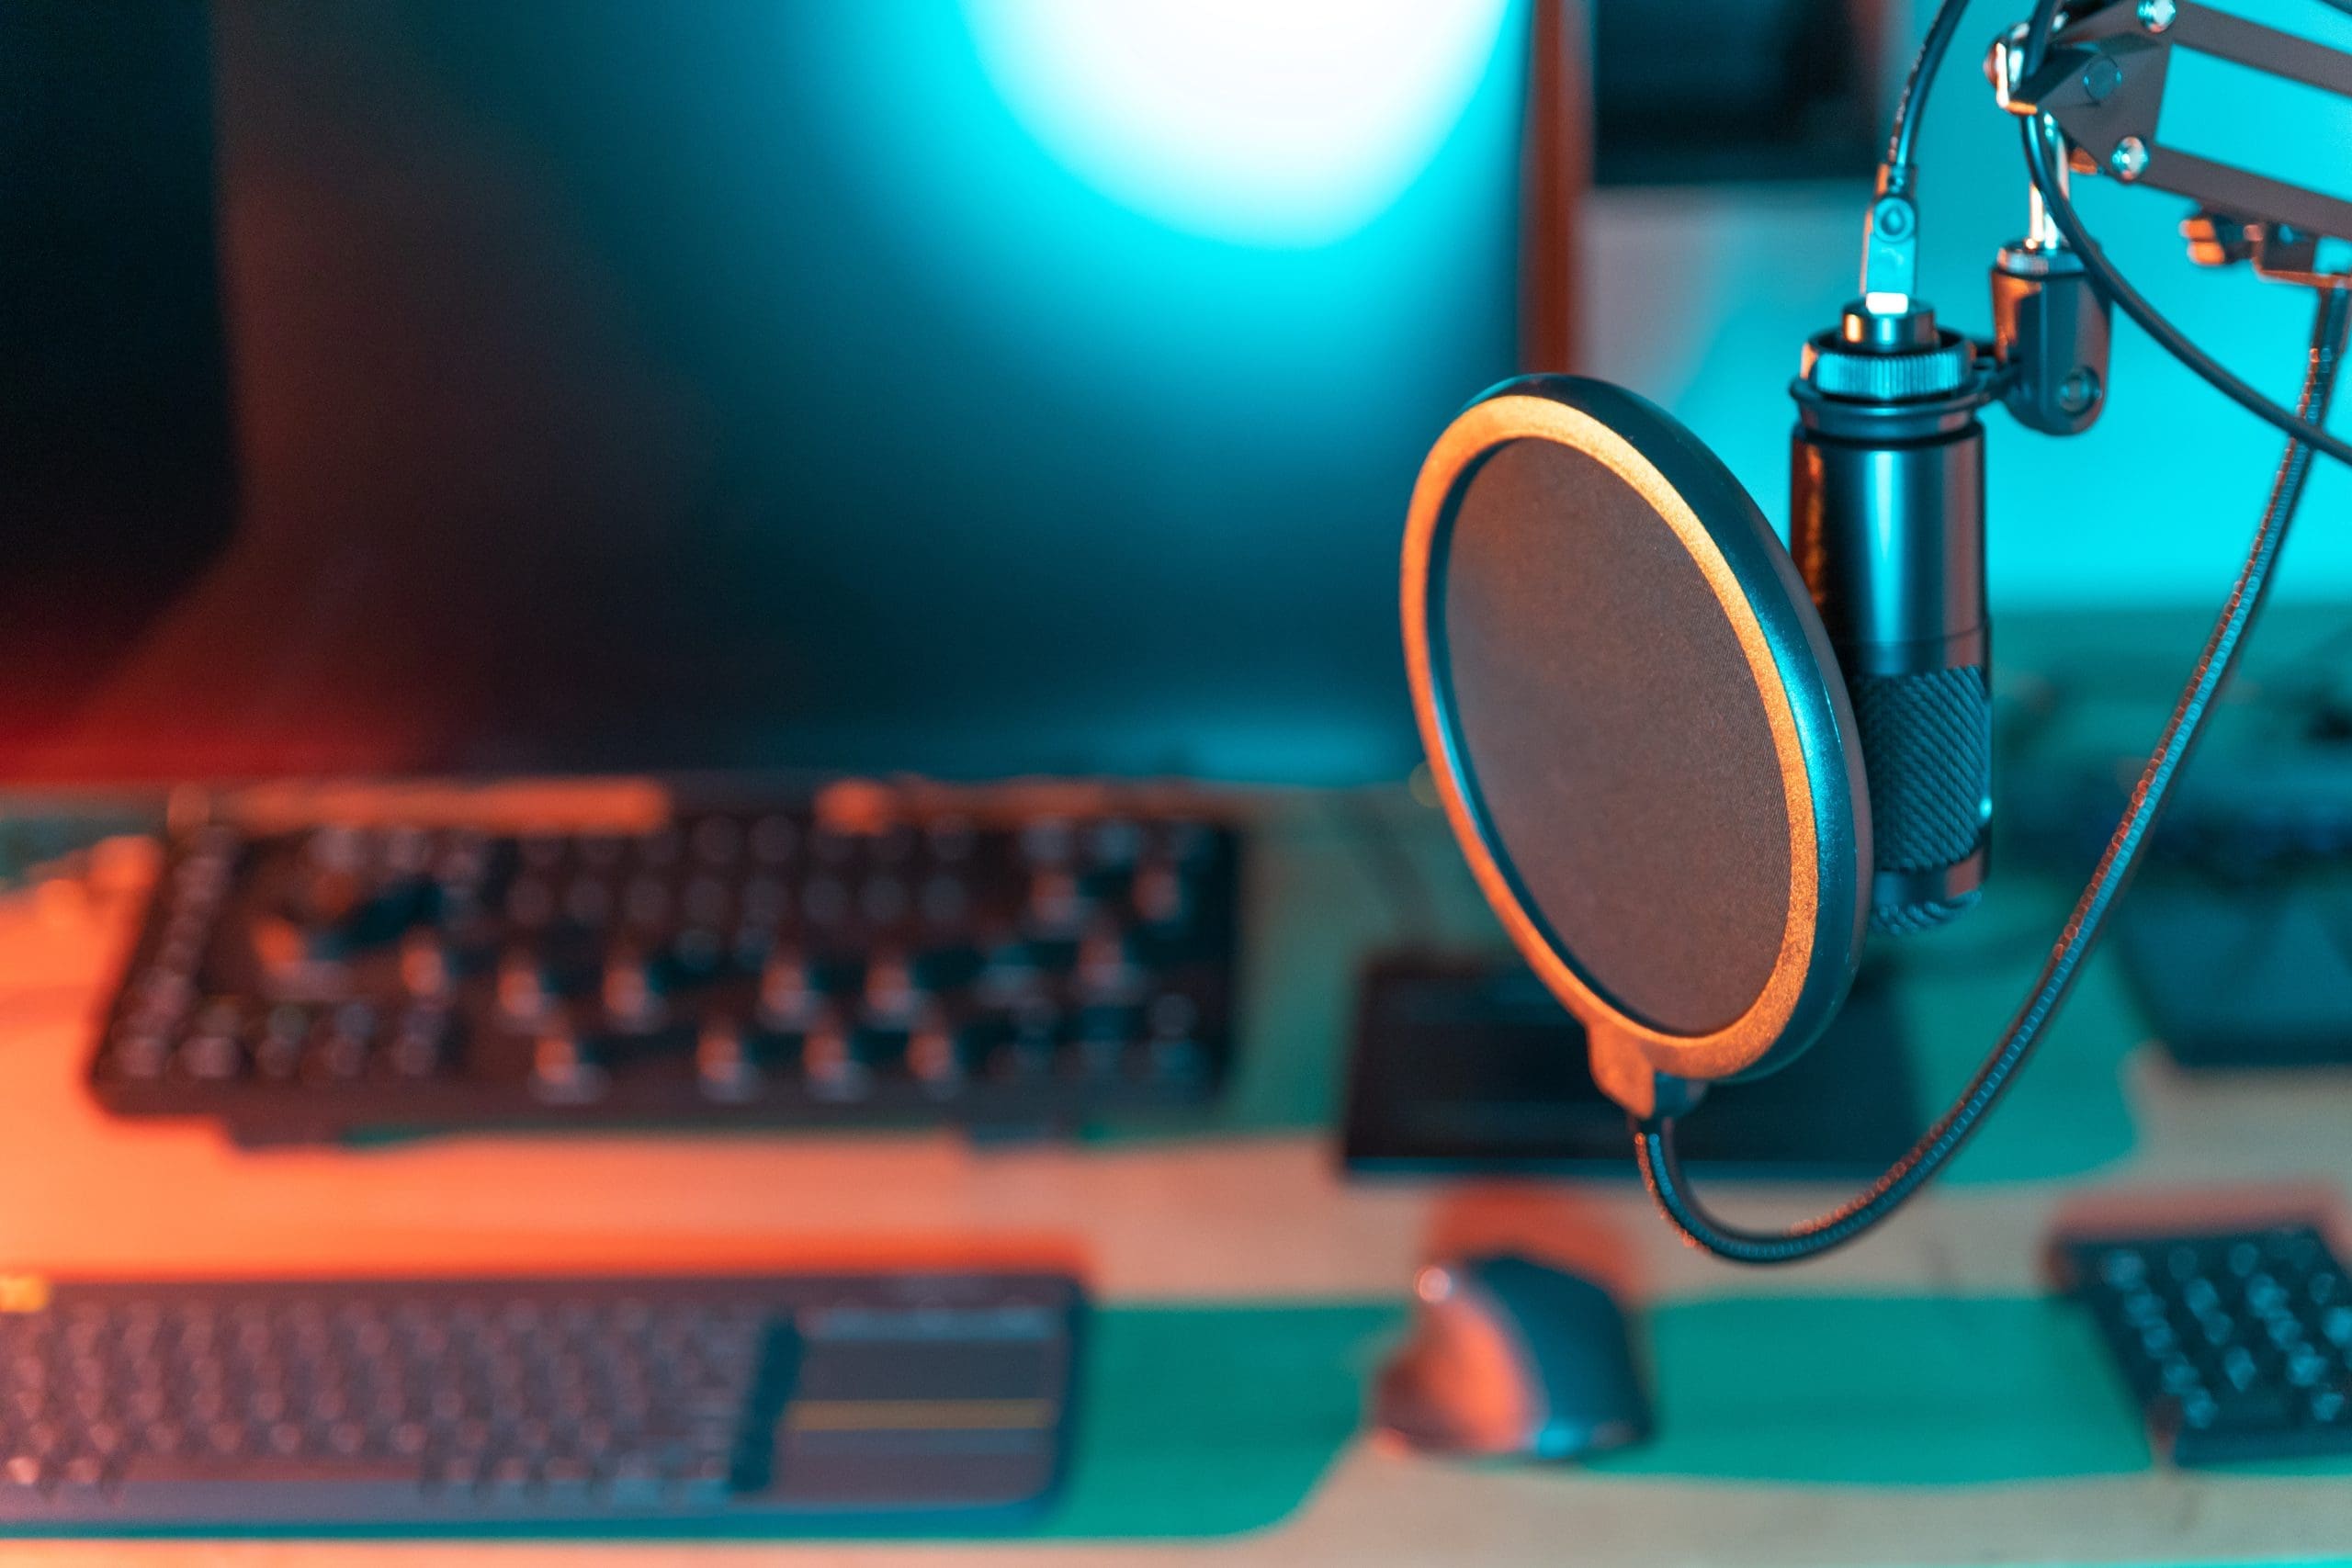 A podcast microphone sits on a desk next to a computer, highlighting the importance of reputation management for podcasters.